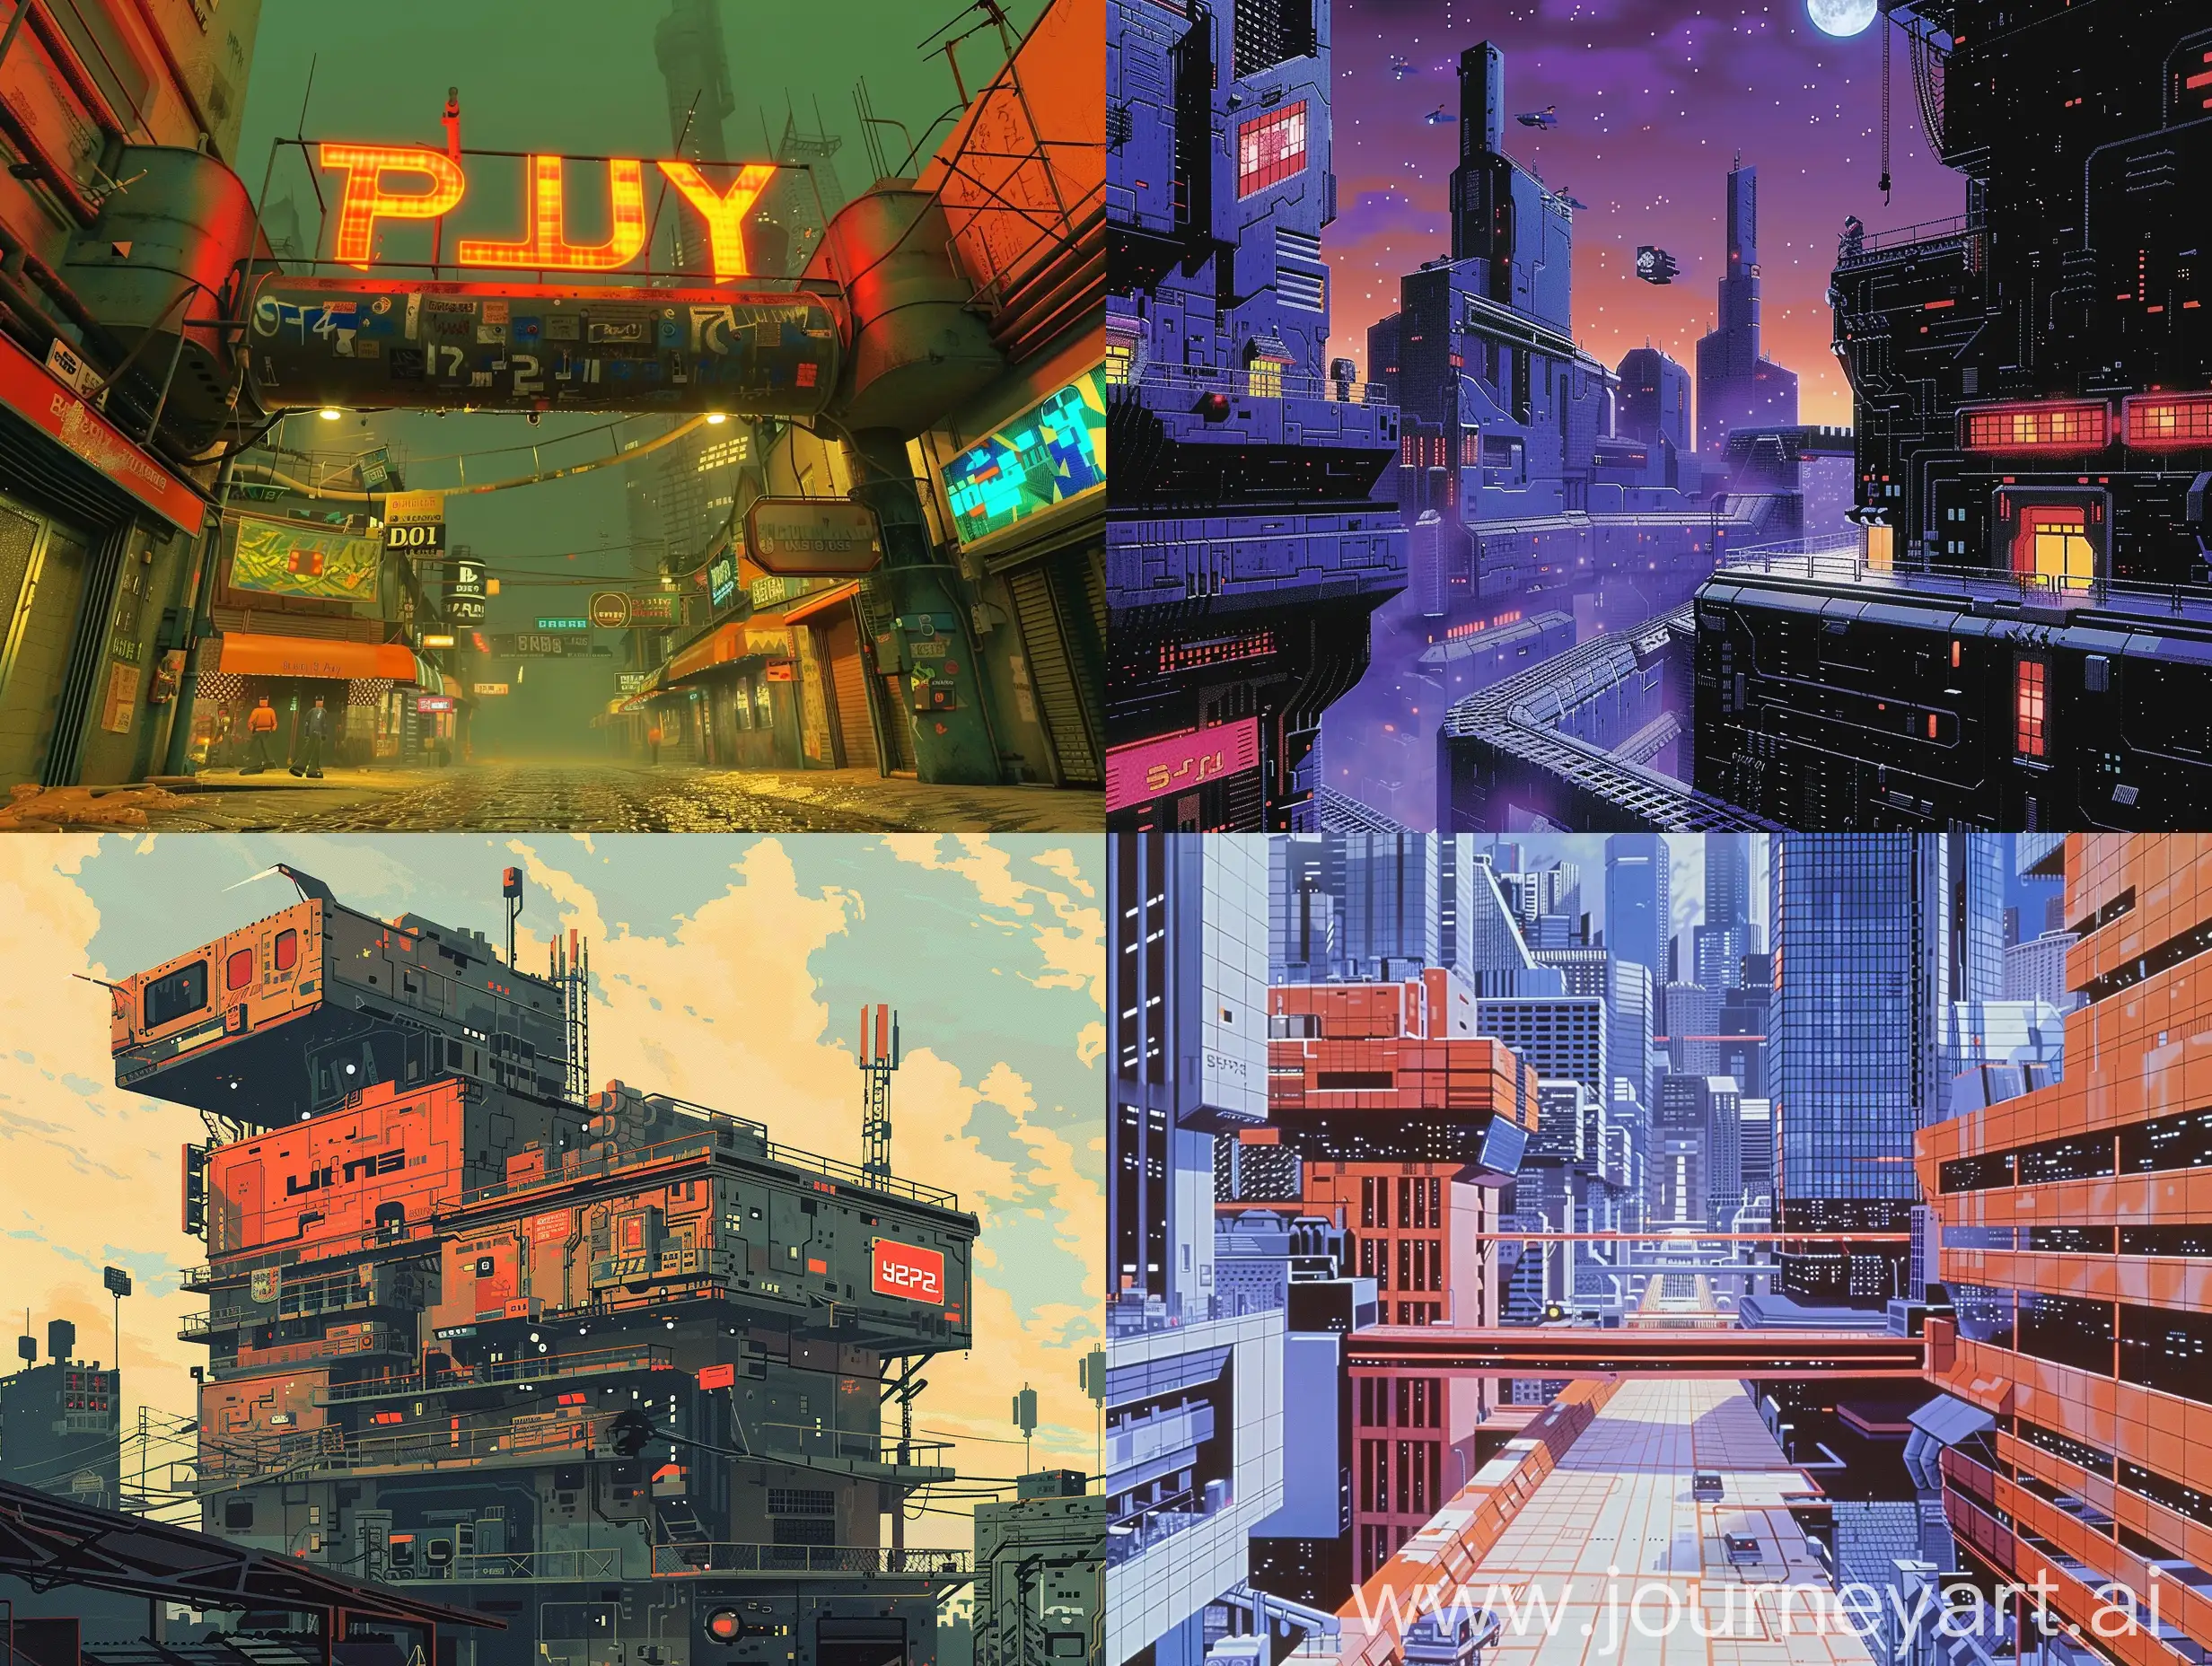 Nostalgic-Cityscape-PlayStation-2-Graphics-with-Retro-and-Y2K-Aesthetic